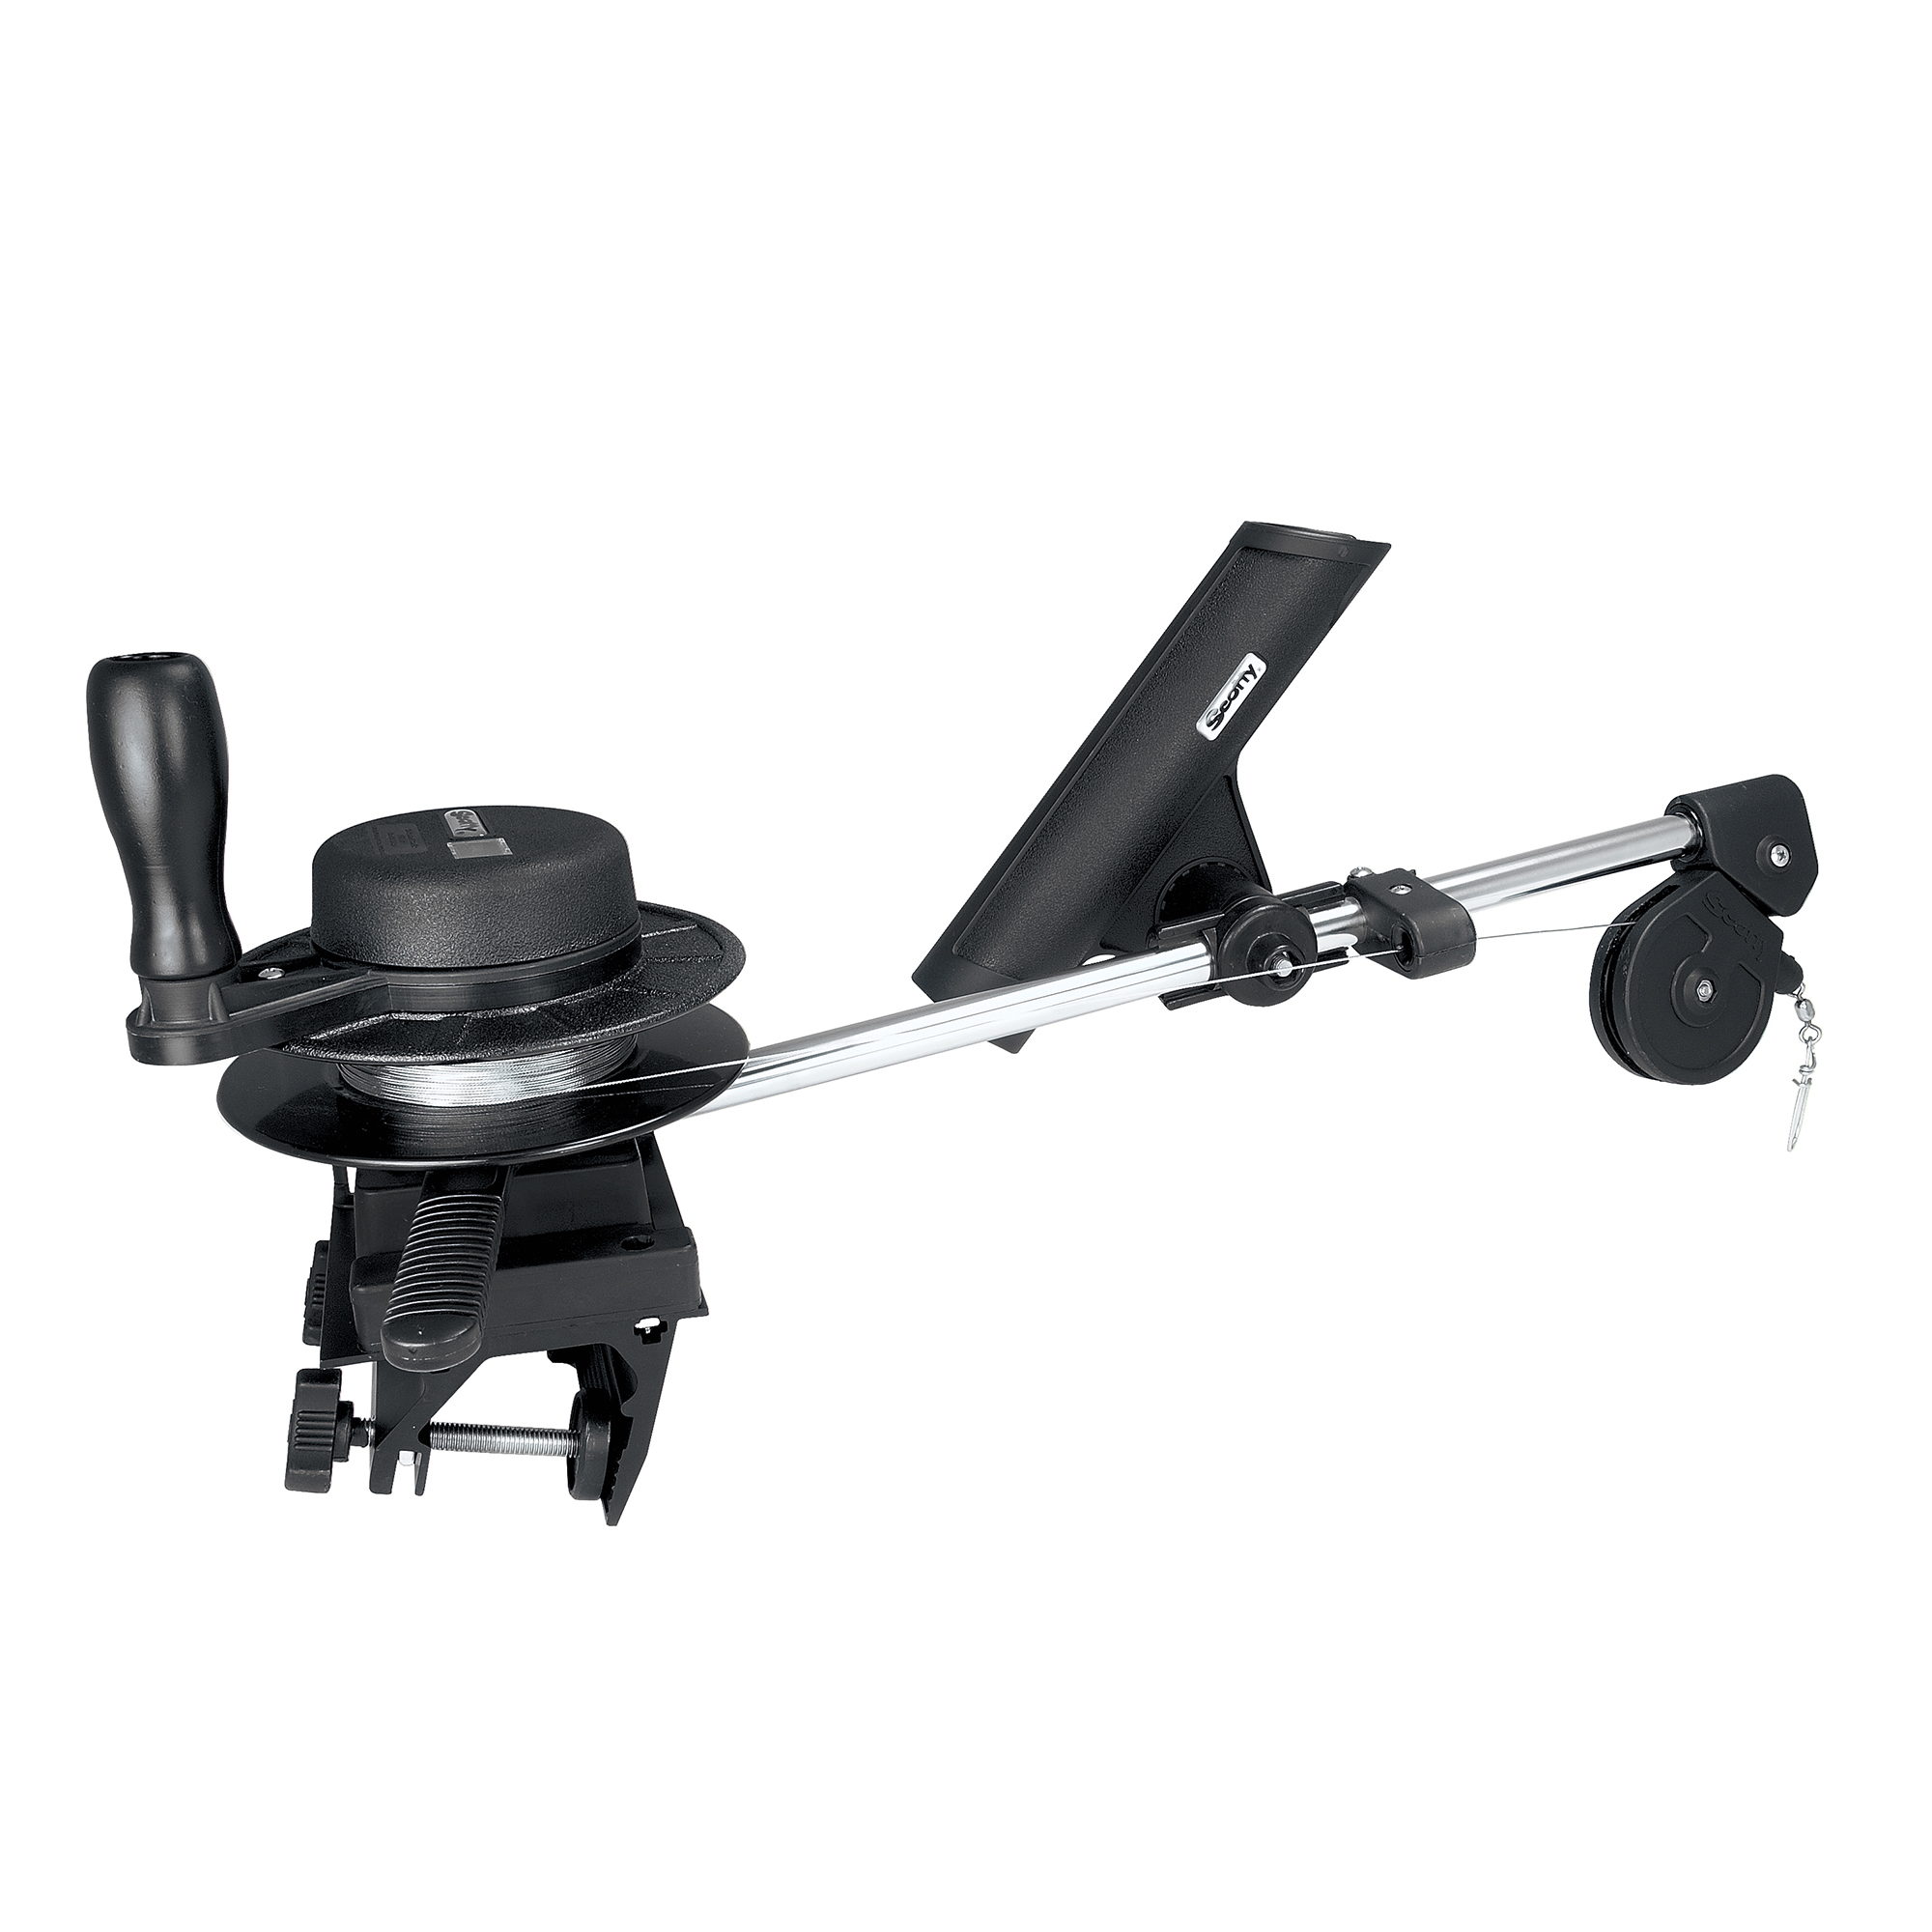 Scotty #1050MP Depthmaster Manual Downrigger Display Packed w/ Rod Holder & Clamp Mount